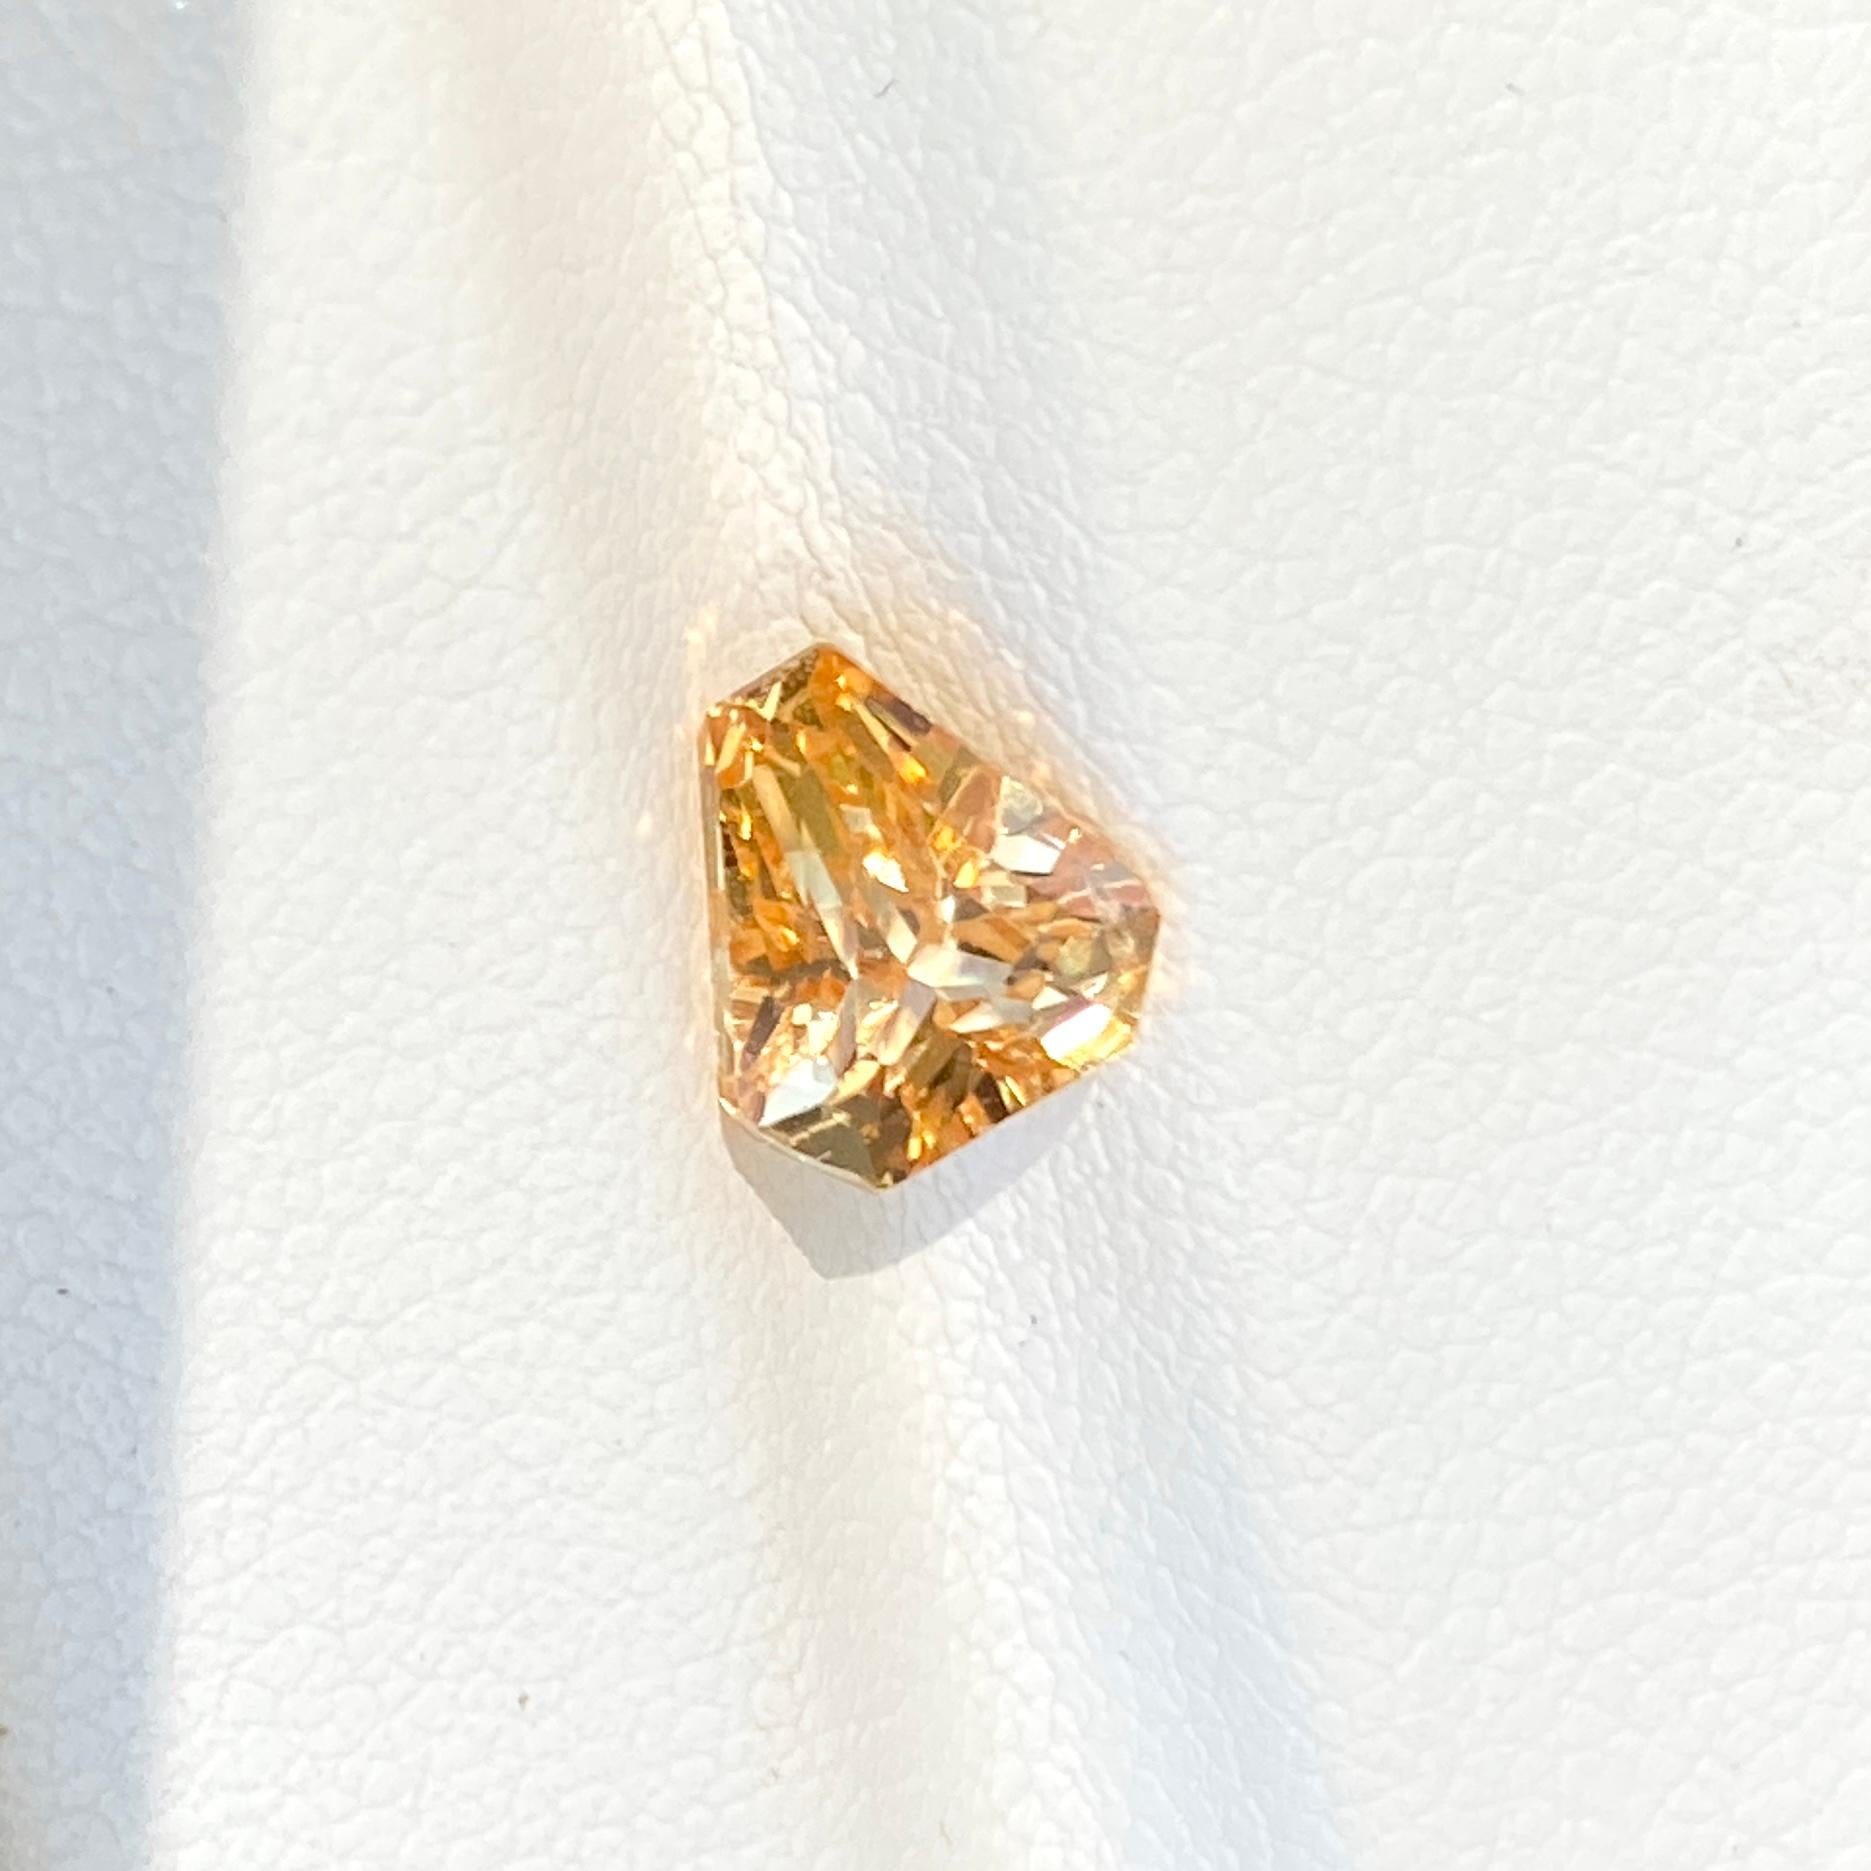 Over 1 carat this extraordinary individual shield cut natural Sri Lankan yellow sapphire has an enhanced glowing rosy gold appearance. A unique triangular fancy cut for that alternative bespoke jewellery piece.

This yellow sapphire is available to